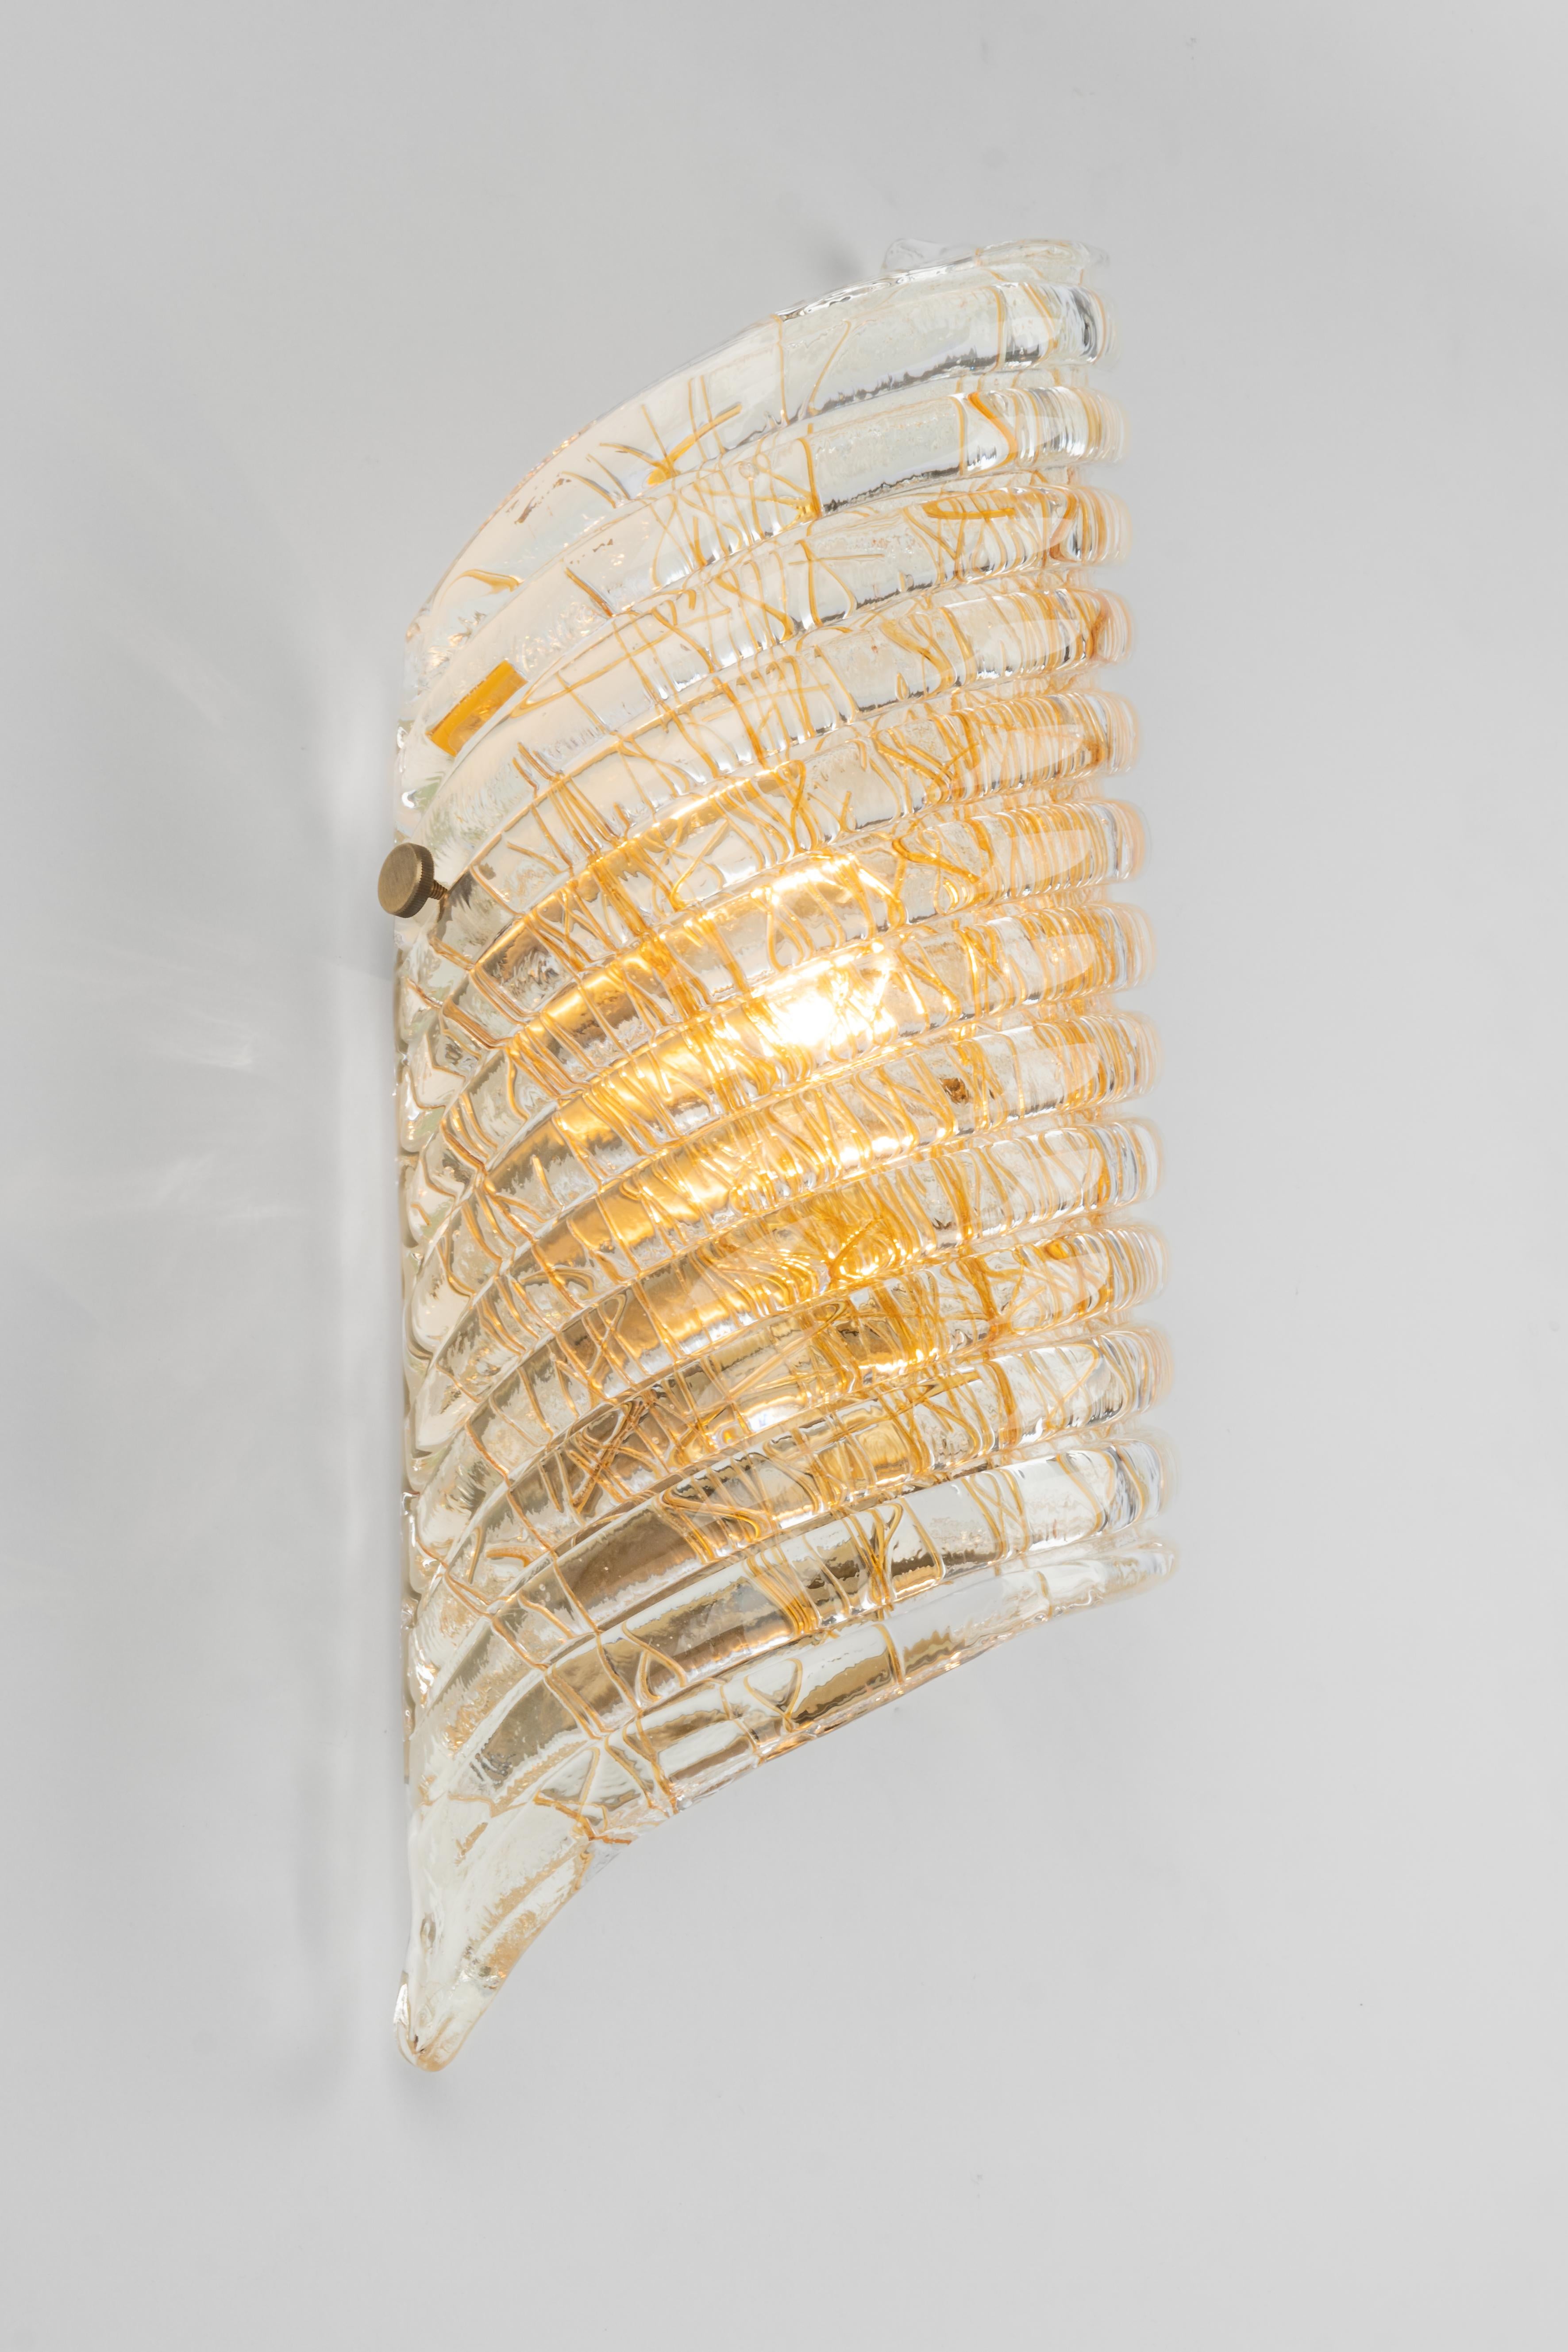 Single Large Murano Brass Sconce by Hillebrand, Germany, 1970s For Sale 3